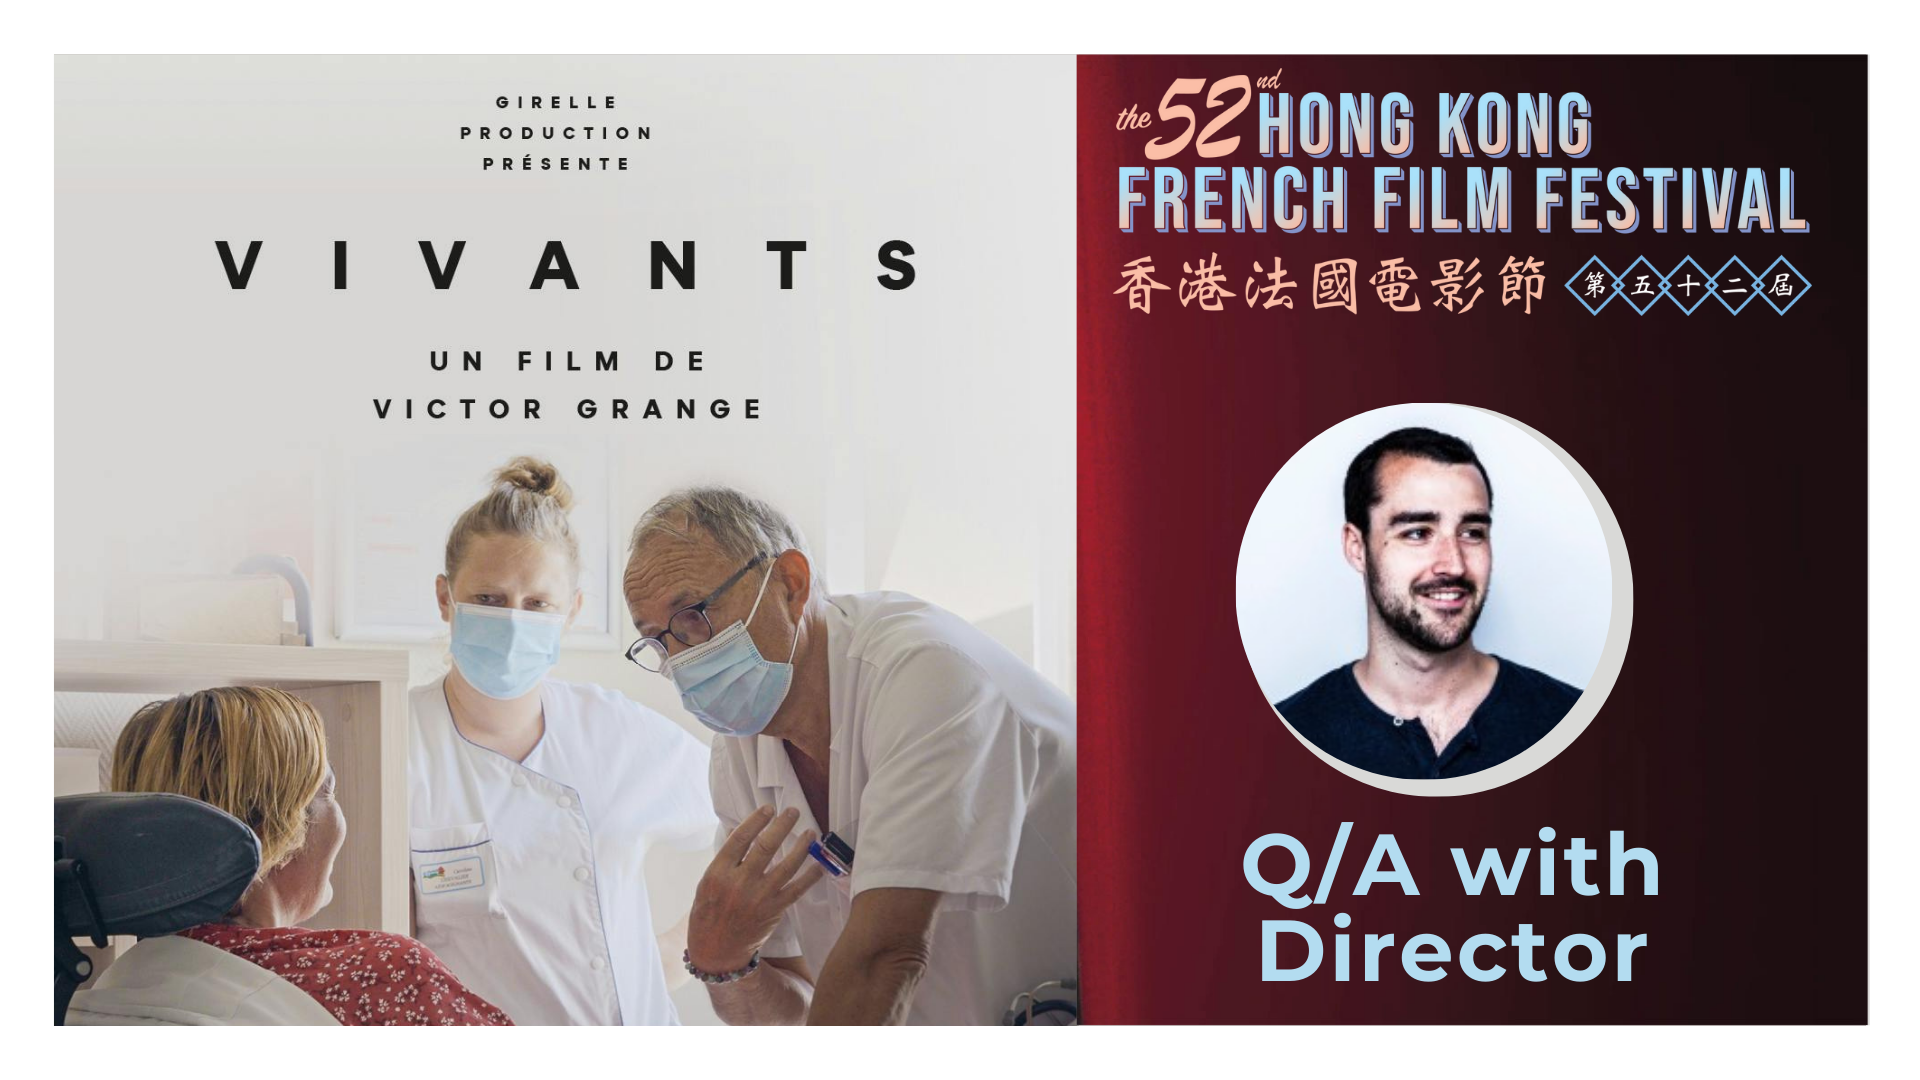 HKFFF - Vivants (Q&A with Director)